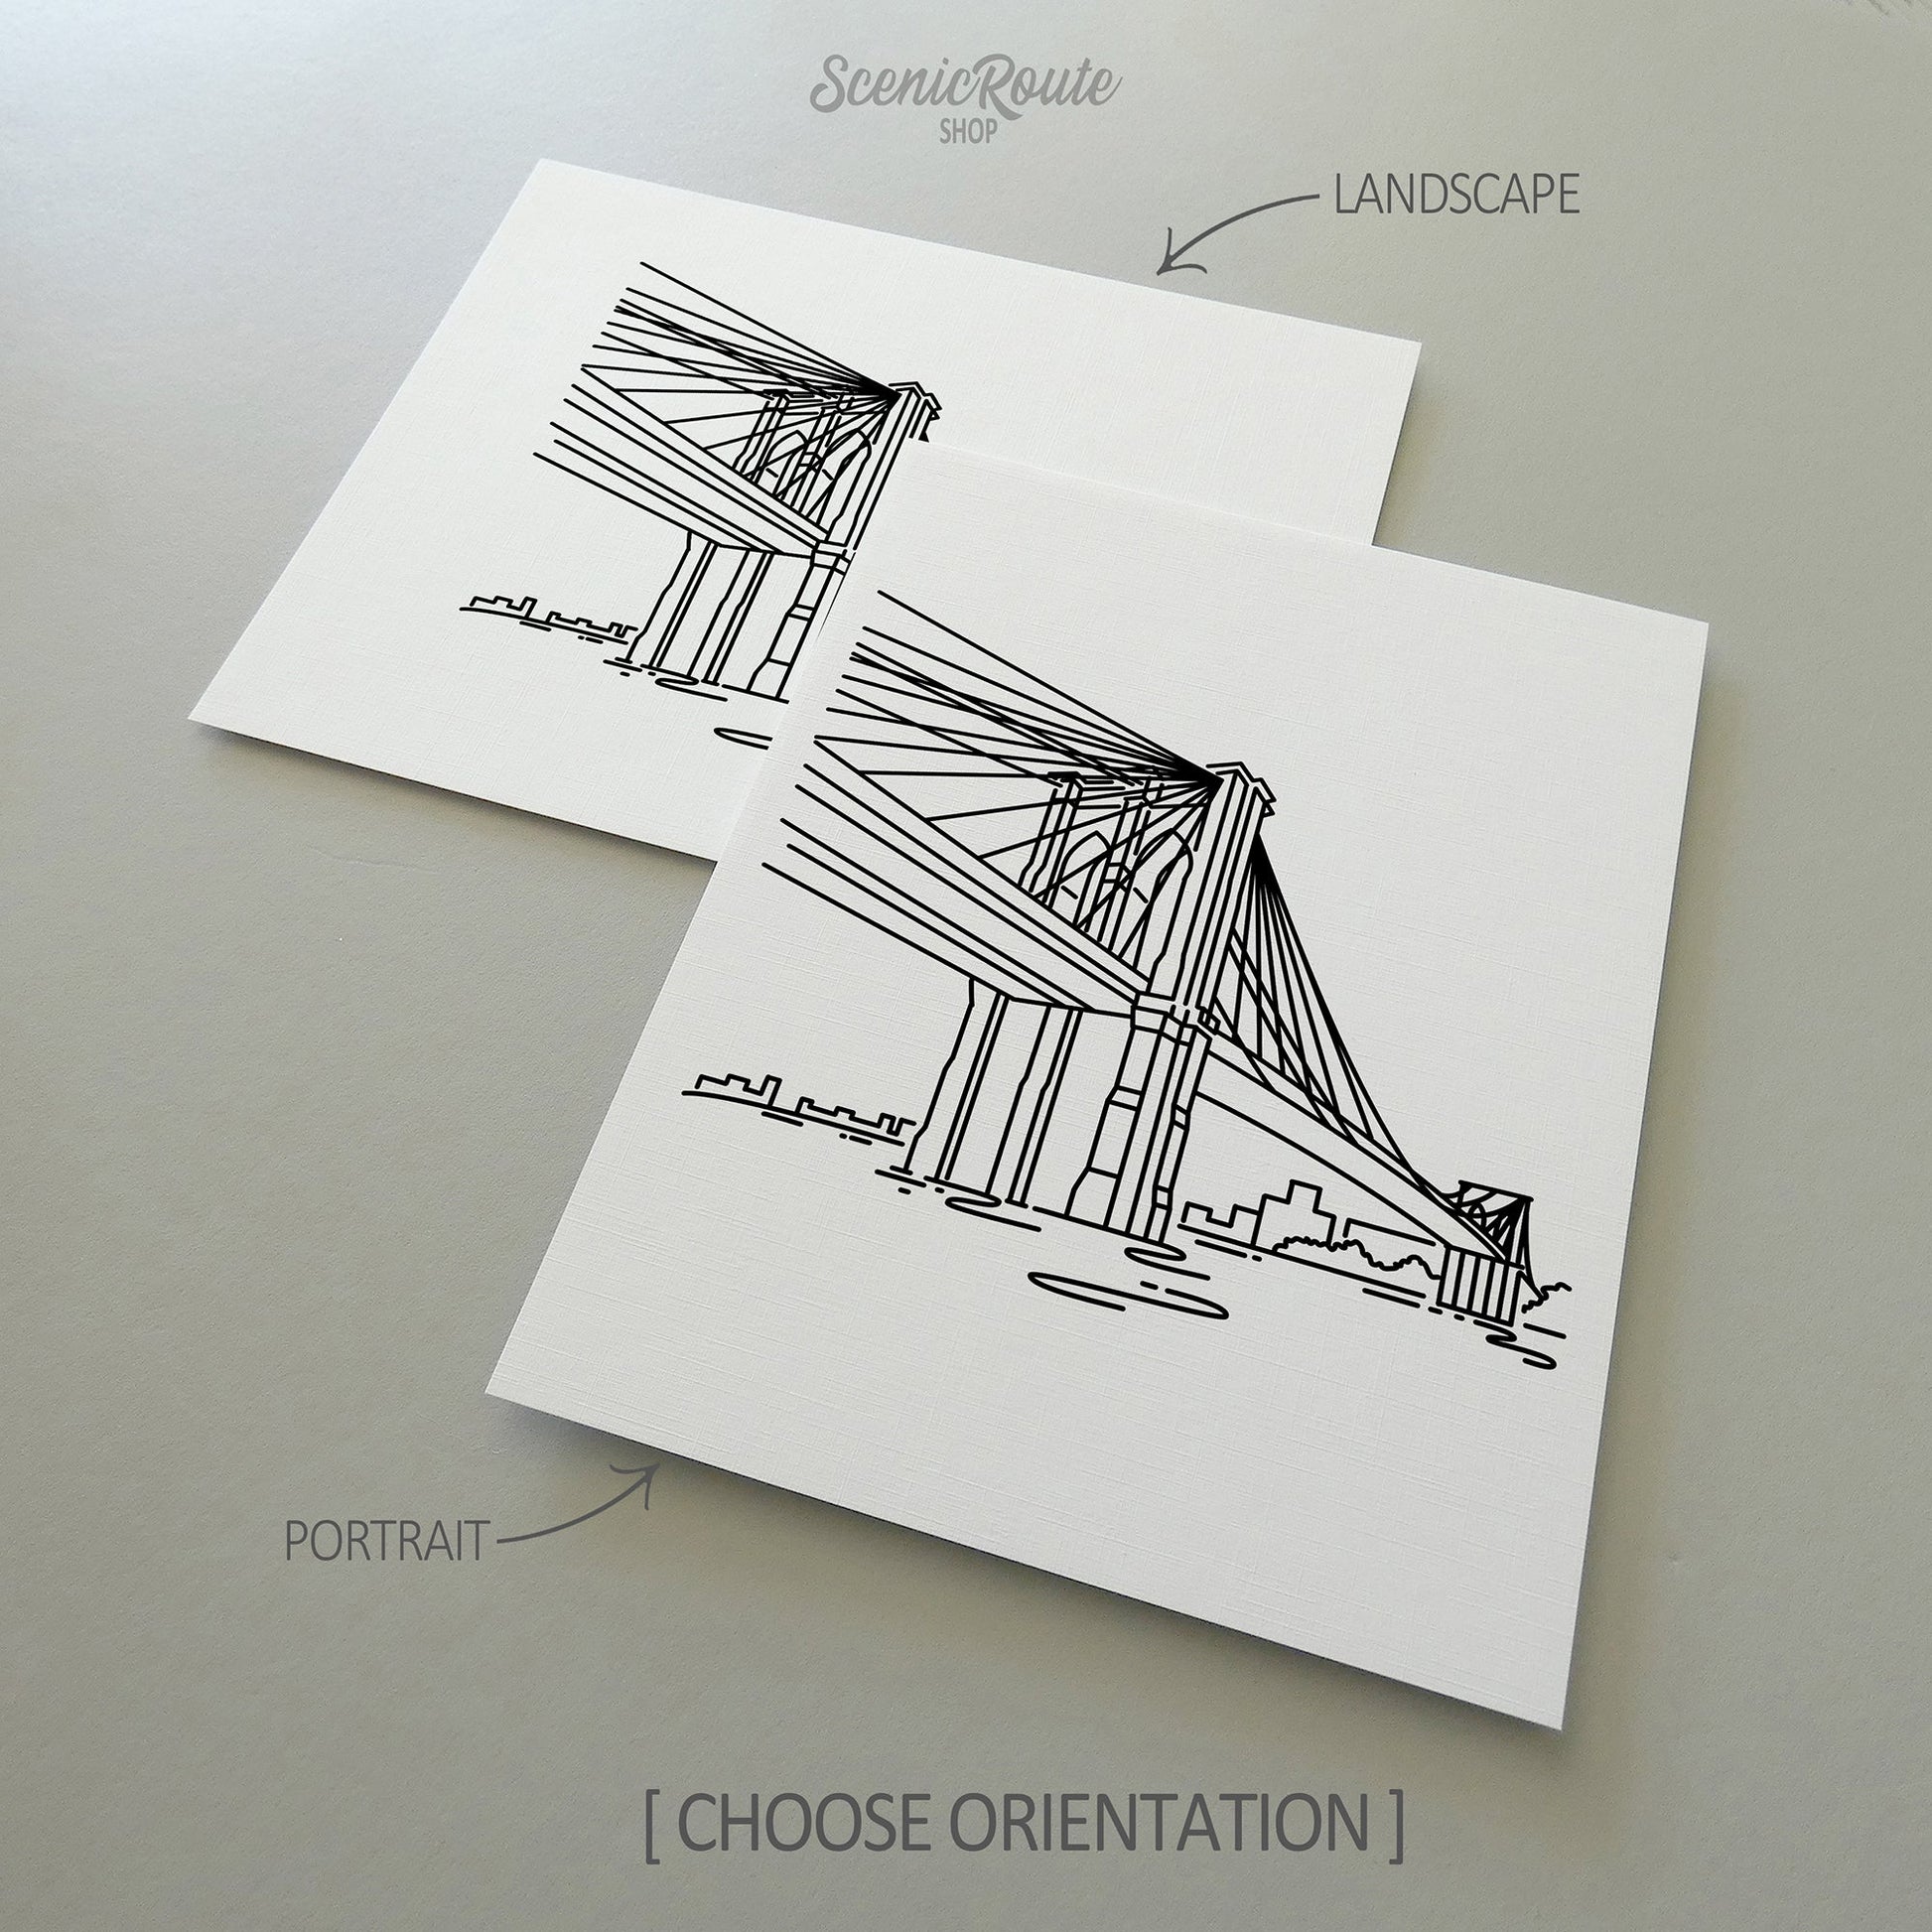 Two line art drawings of the Brooklyn Bridge on white linen paper with a gray background.  The pieces are shown in portrait and landscape orientation for the available art print options.